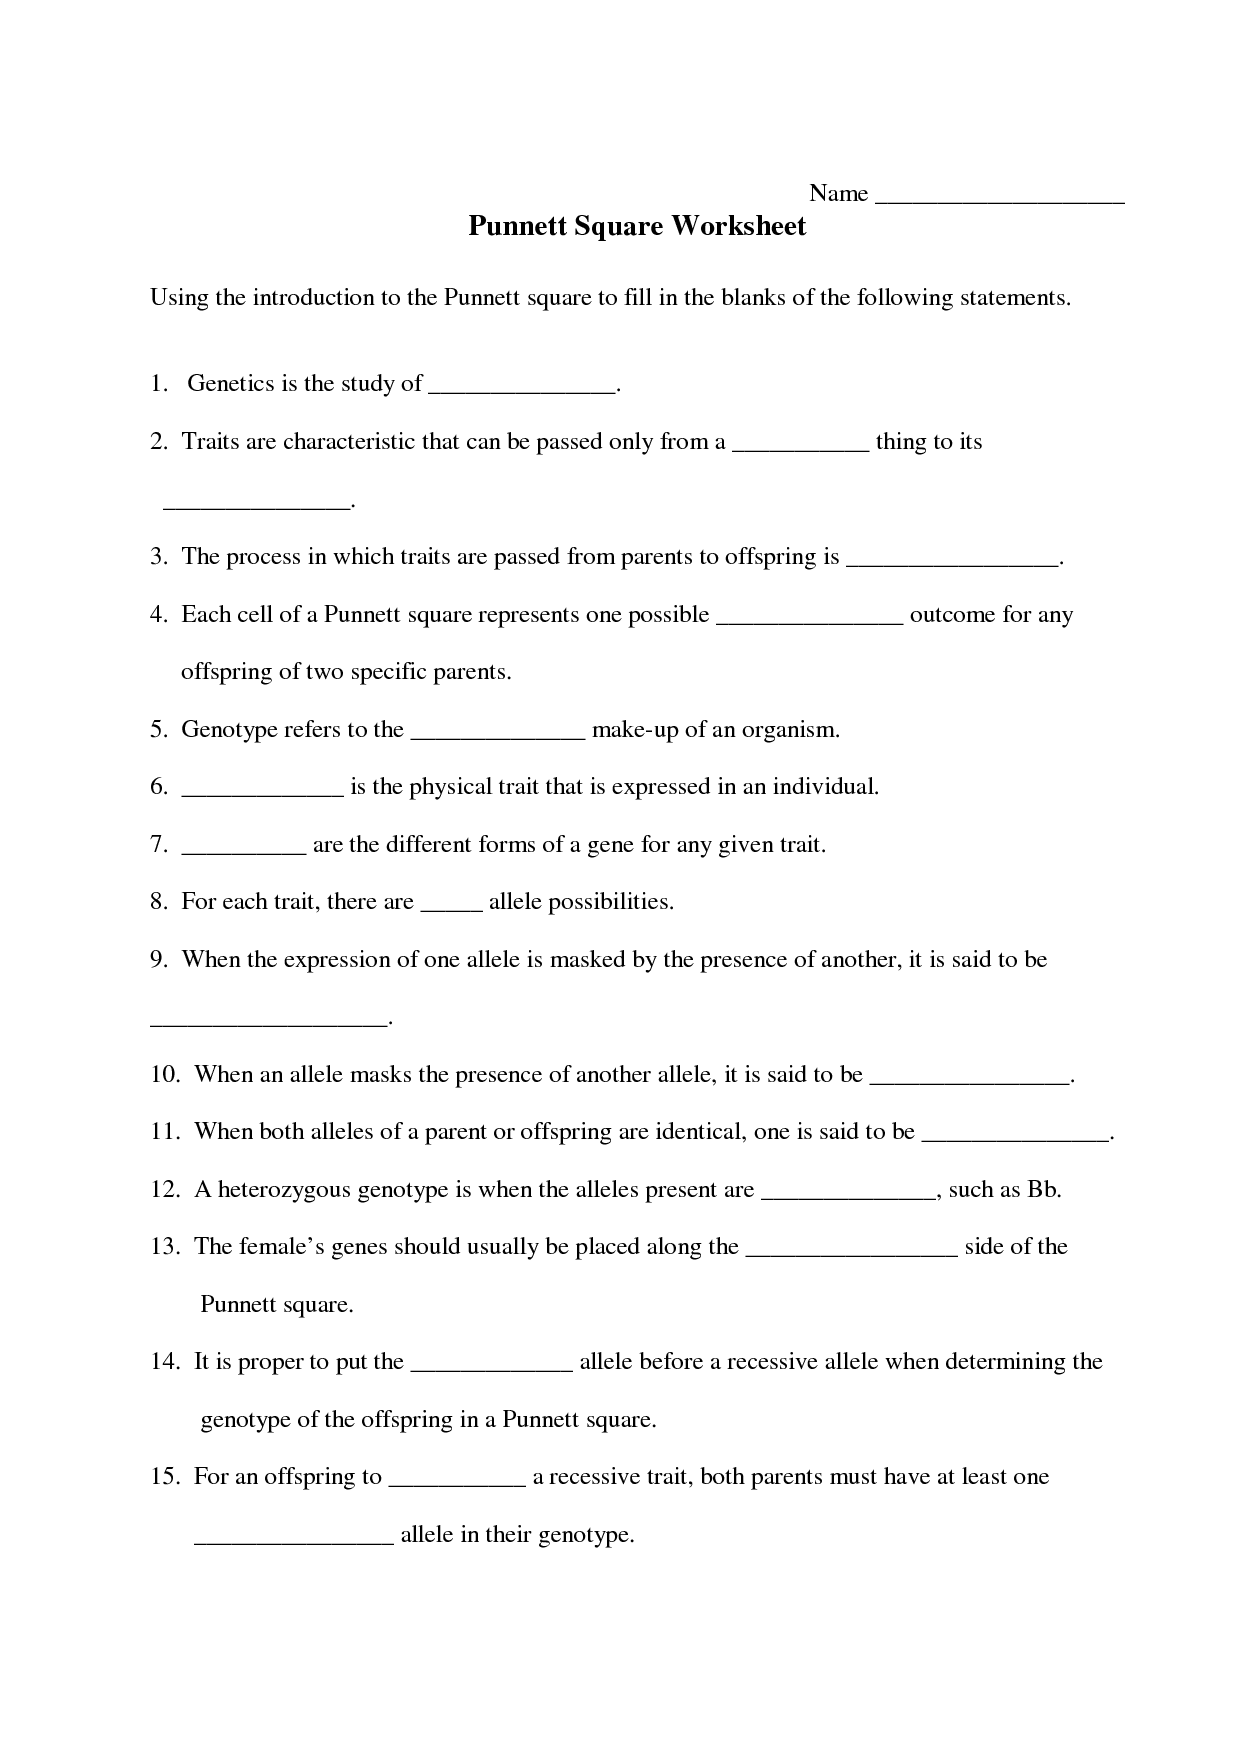 13 Best Images of Punnett Square Worksheets With Answers 